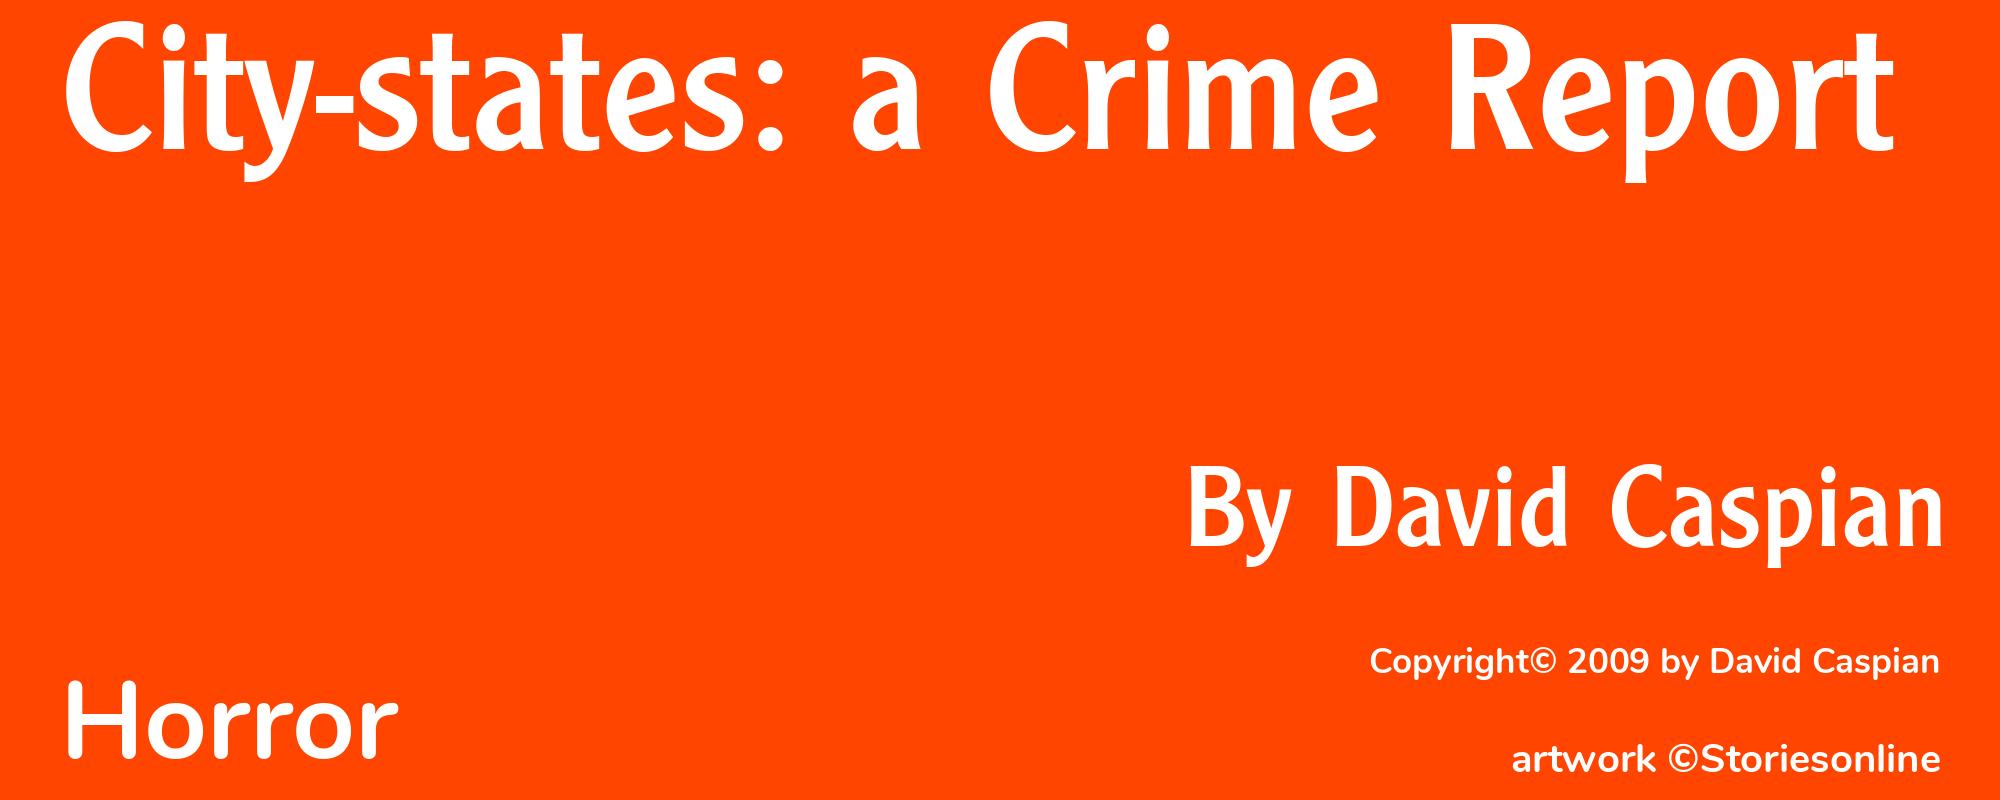 City-states: a Crime Report - Cover